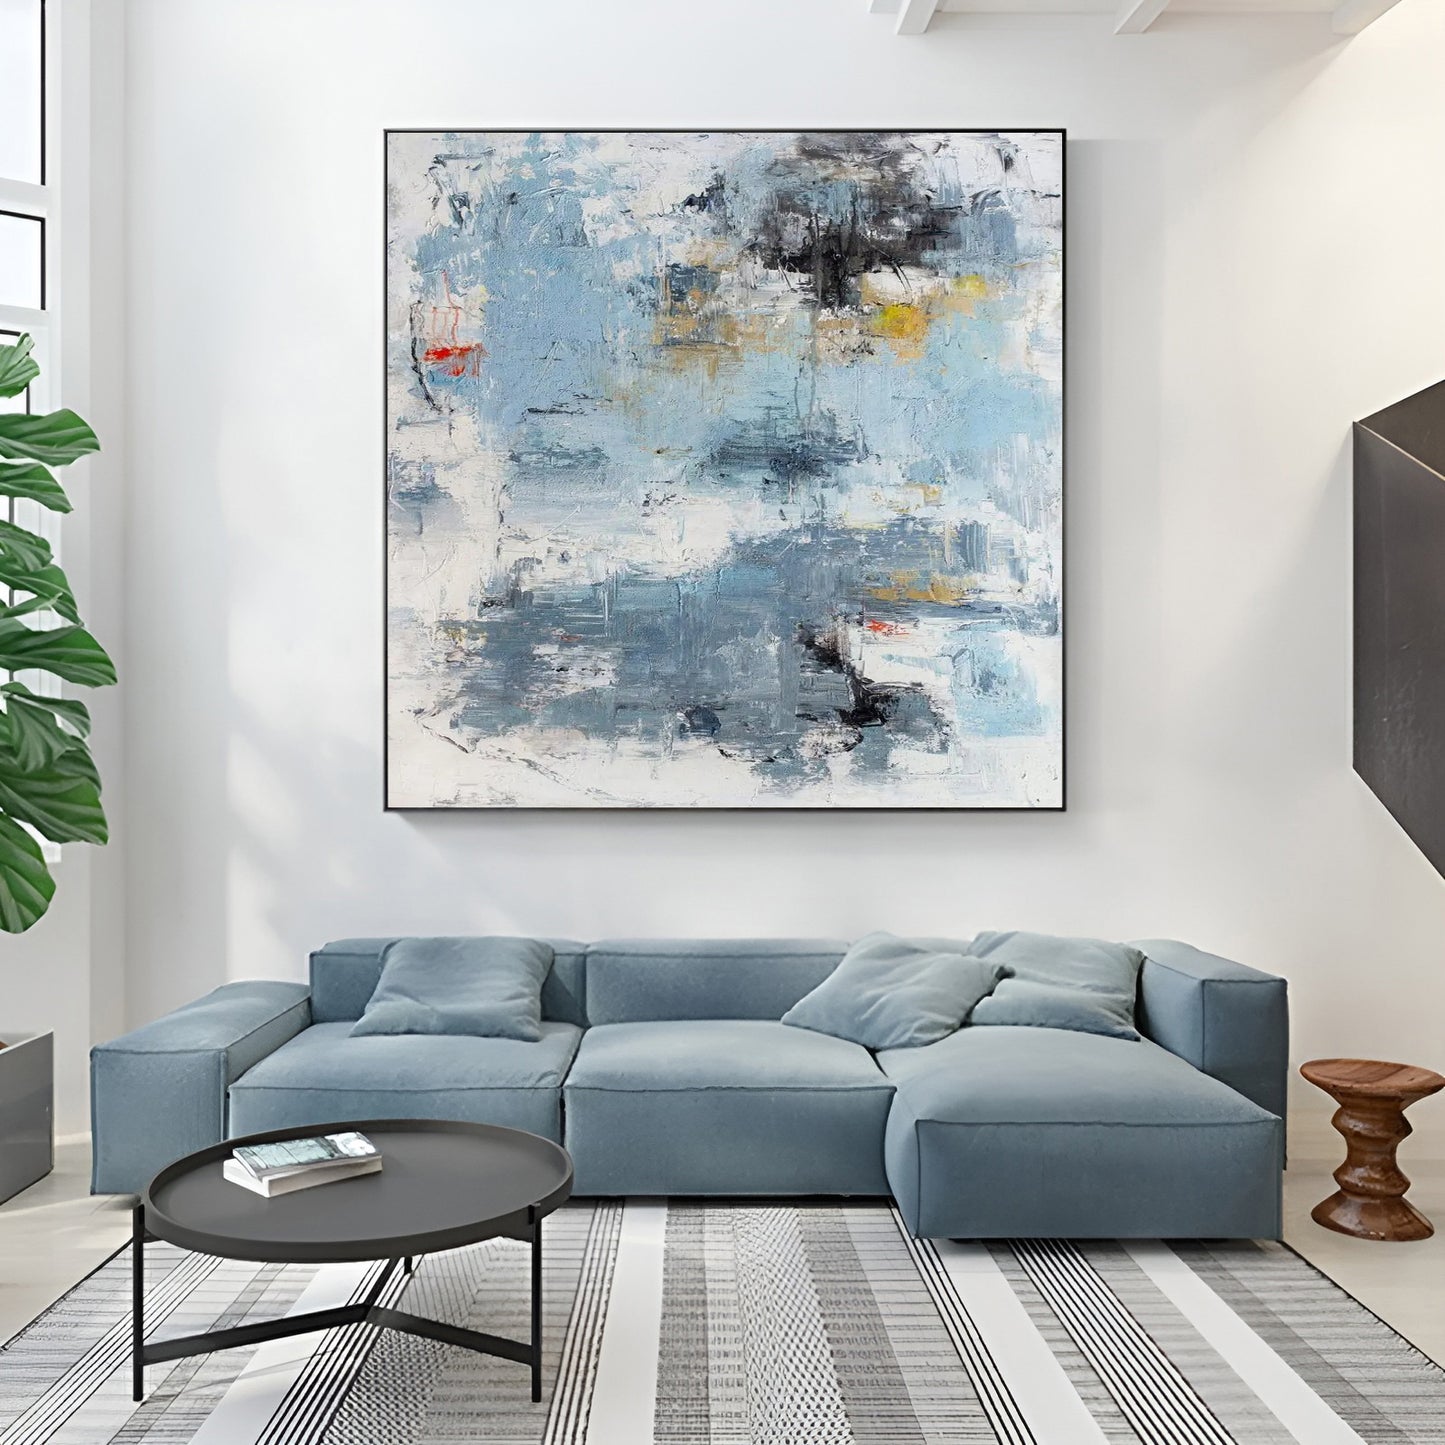 Angelic - Large Abstract Blue and White Painting on Canvas